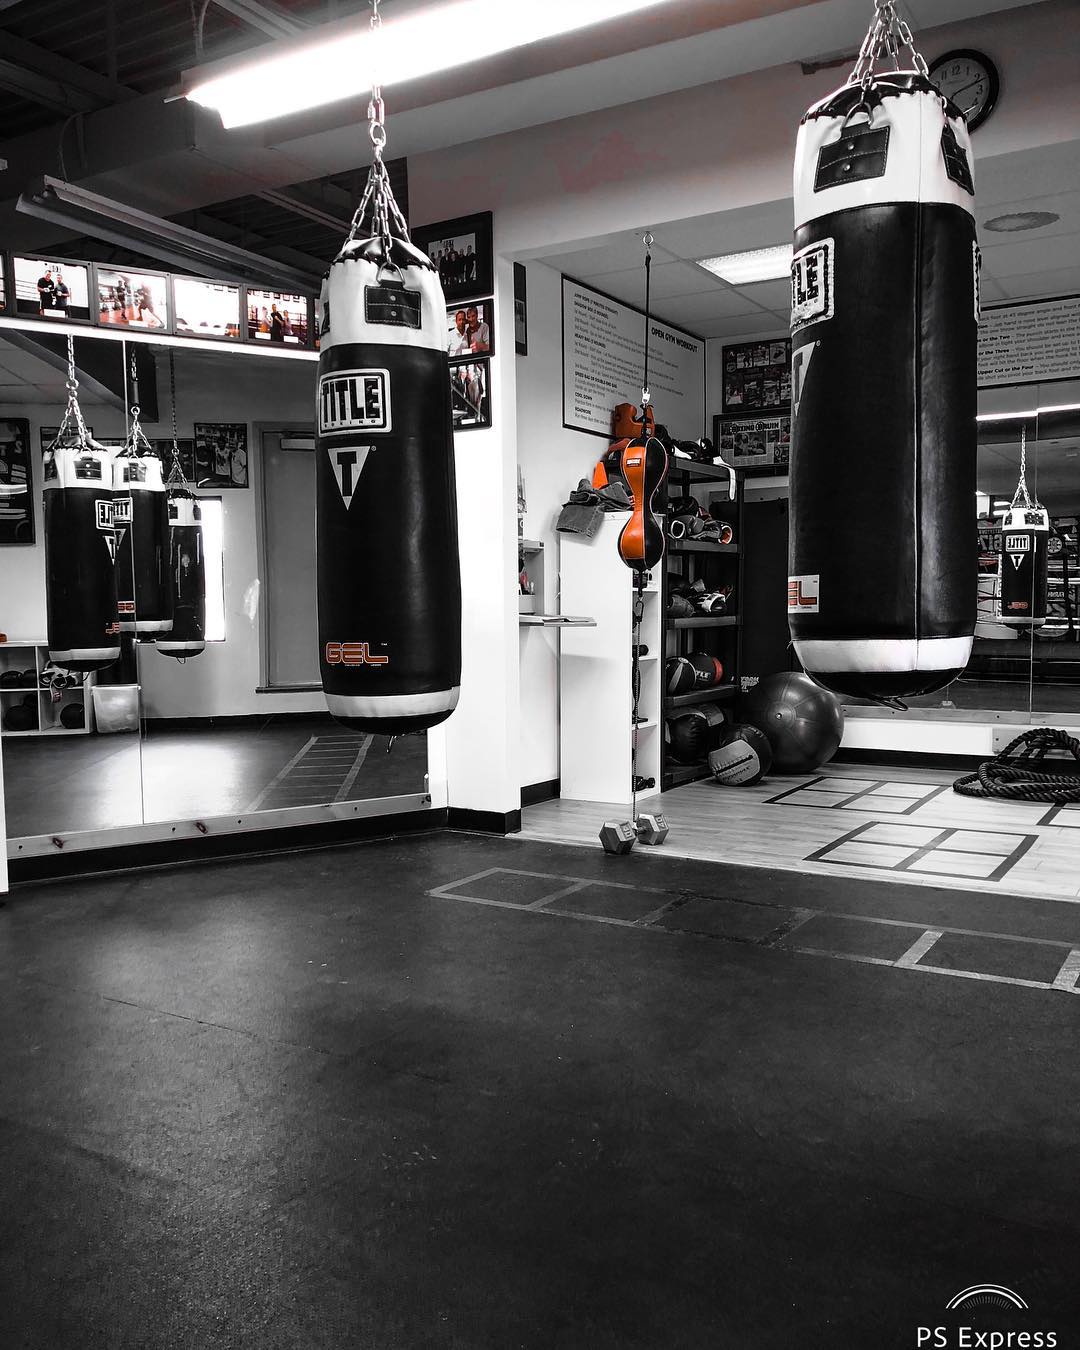 #BOXING It’s never to late to start !! Contact us At (781)727-9503 to Schedule your FREE Boxing Workout . . . . #fitness #sweetscience #inshape #workouts #boxingtraining #workout #boxingtrainer #Boston #feelGood #stressrelief #Dedham #getit